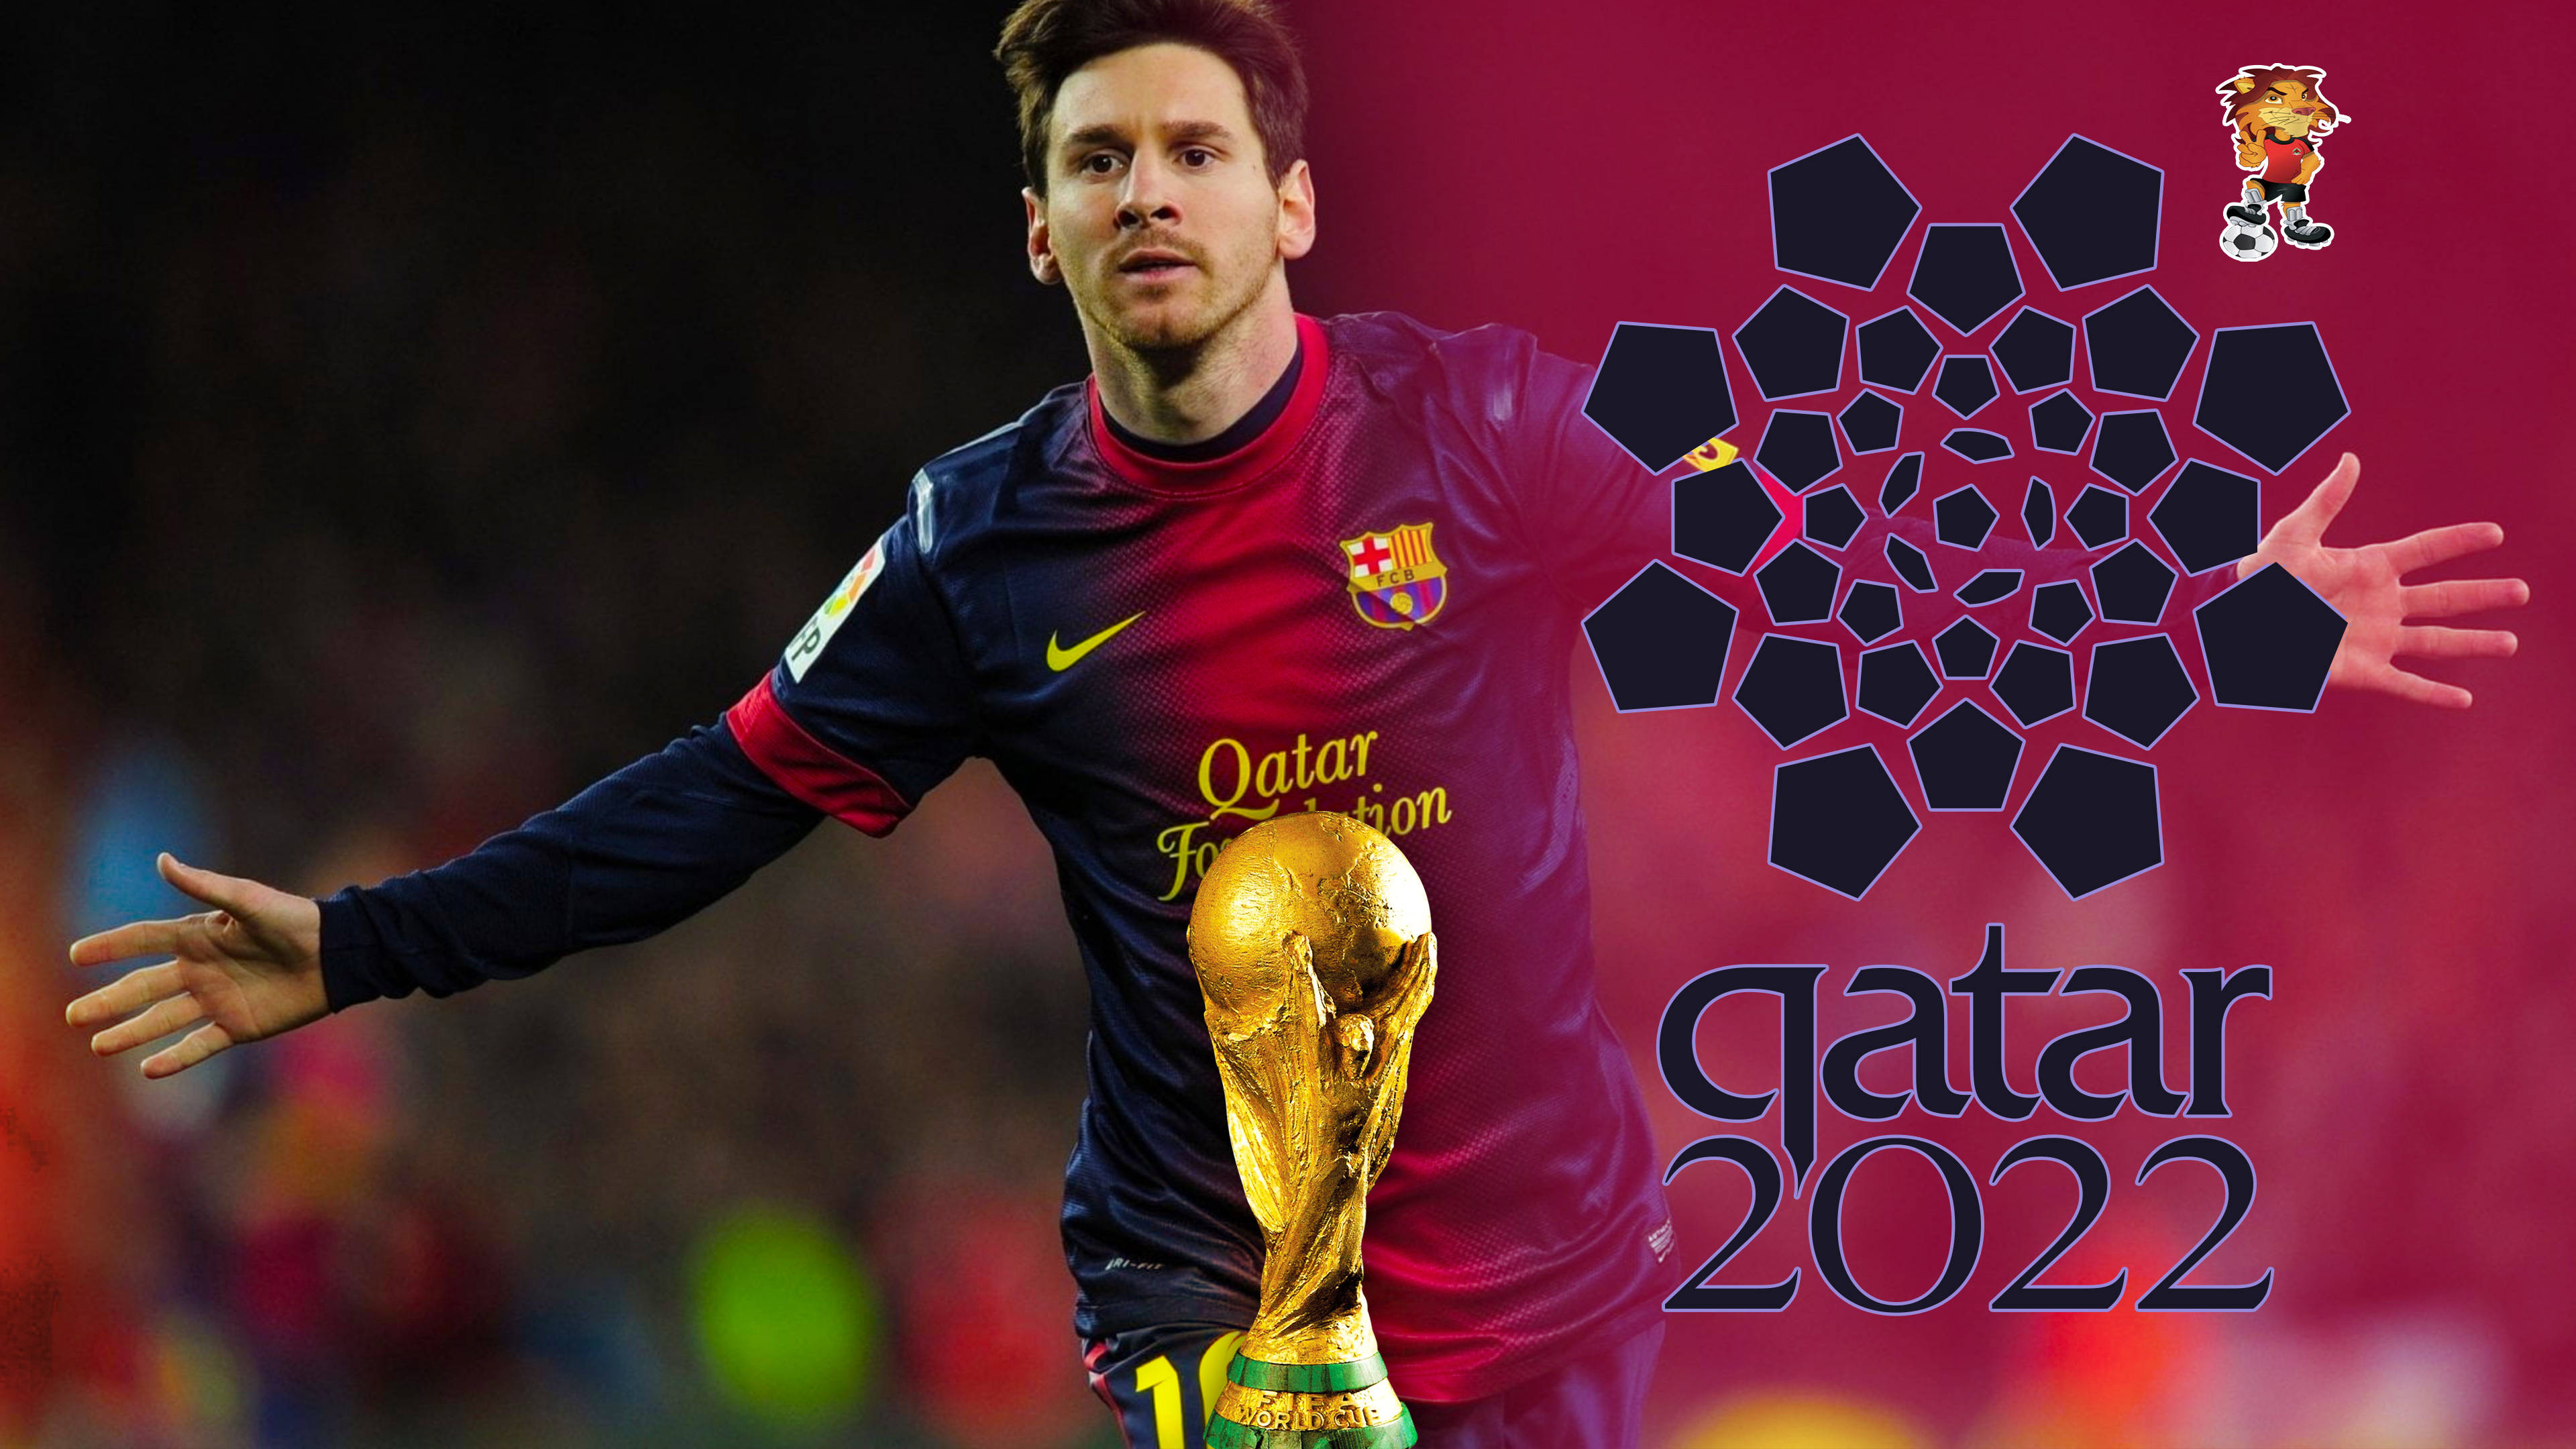 World Cup 2022 Messi Wallpapers